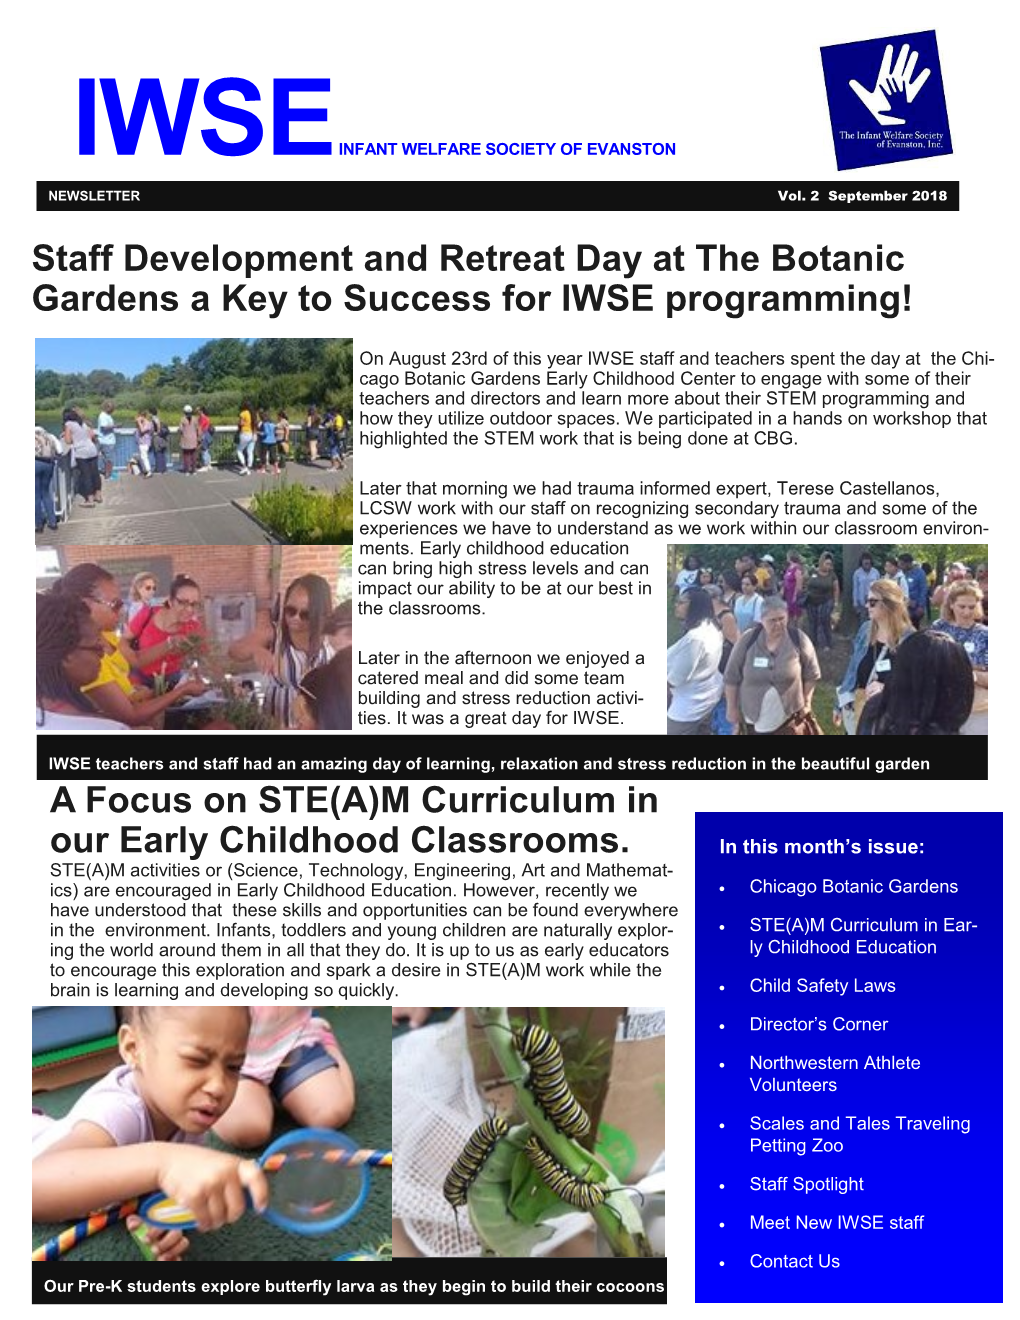 Please Click Here to Download the September 2018 Newsletter